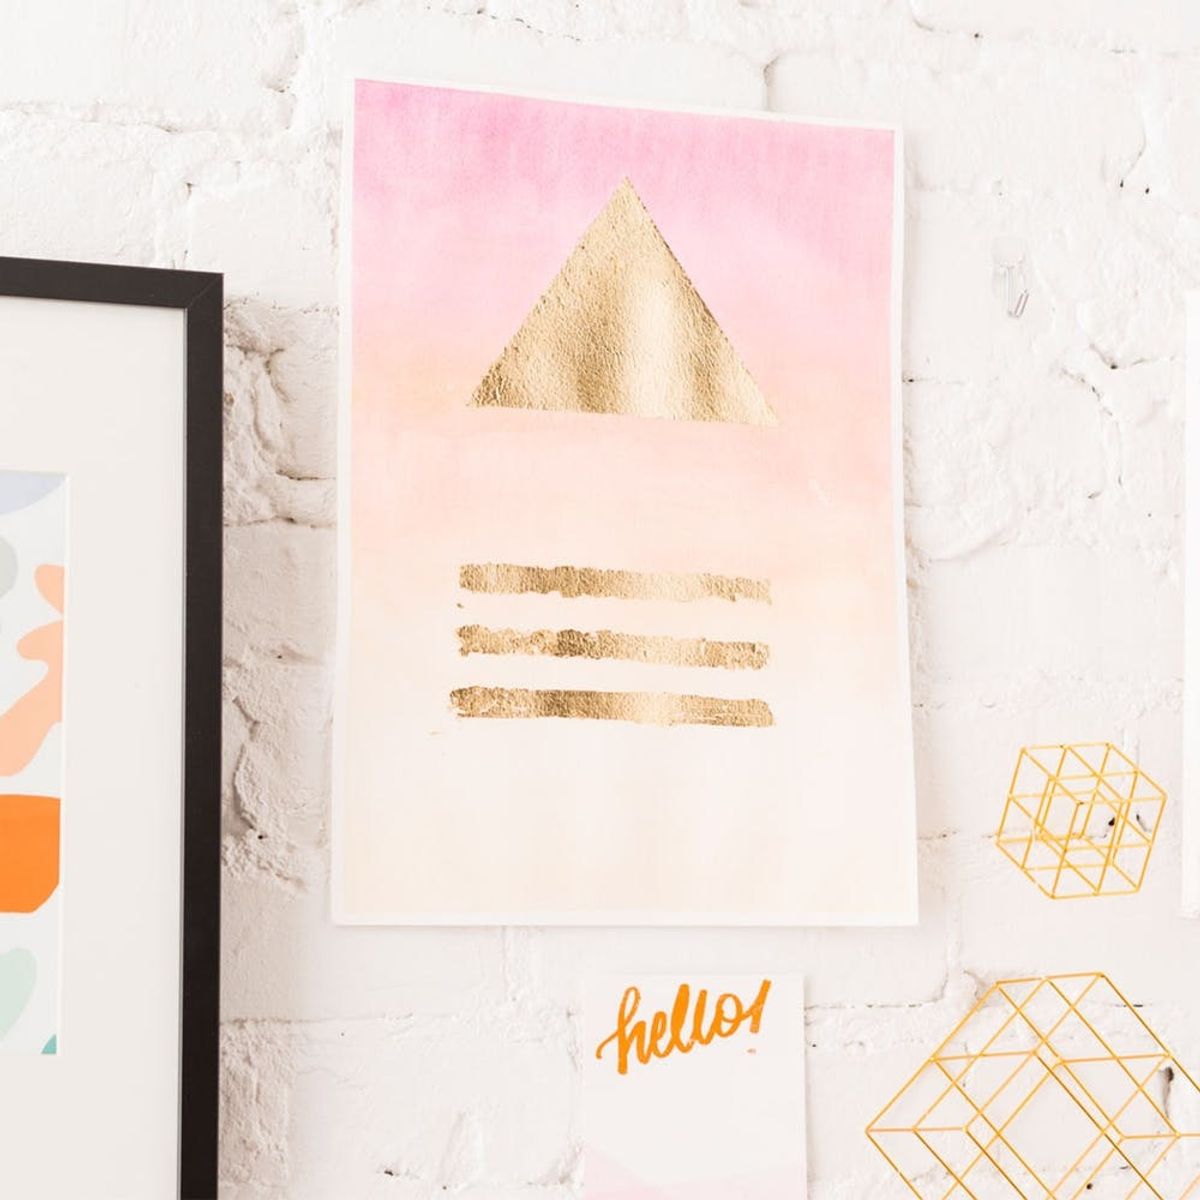 DIY This $2000 Anthropologie Wall Art for Less Than a Round of Drinks